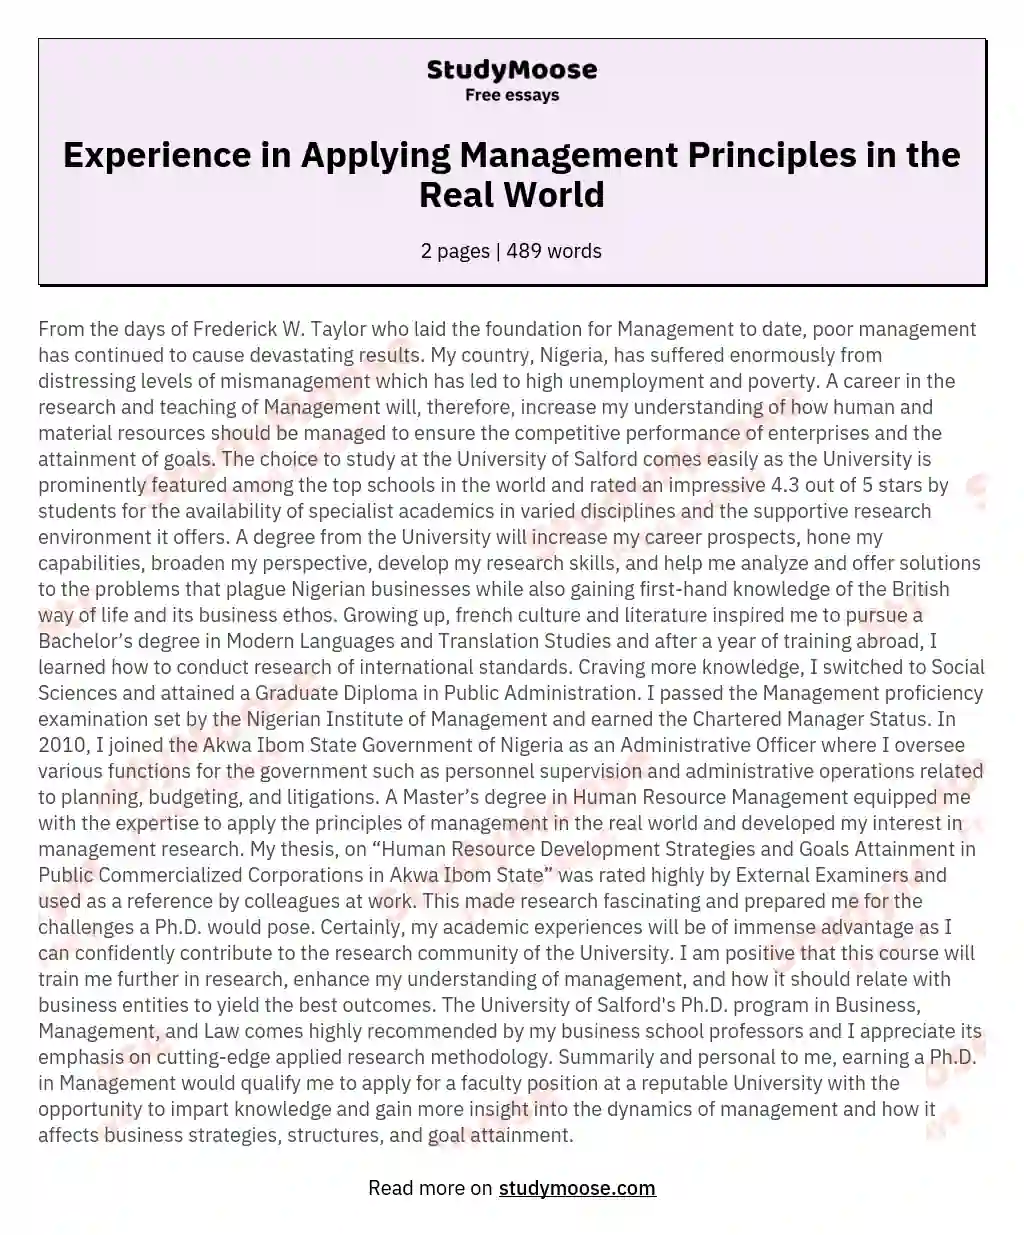 Experience in Applying Management Principles in the Real World essay